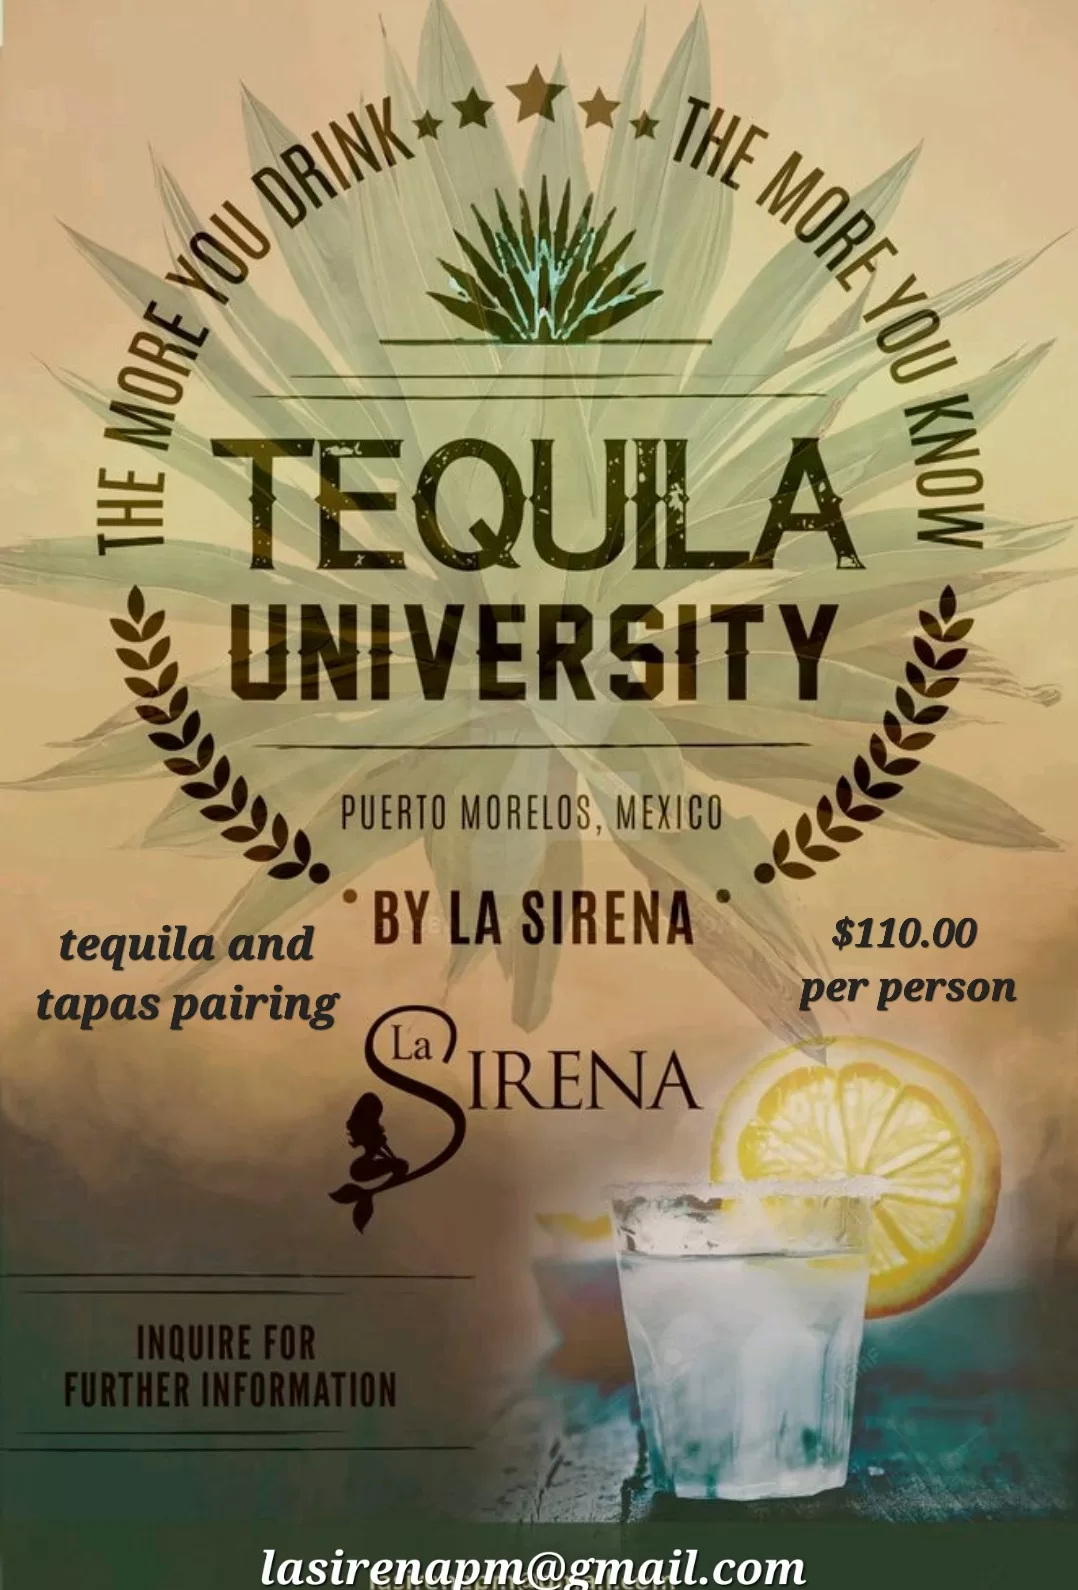 Tequila University with pricing